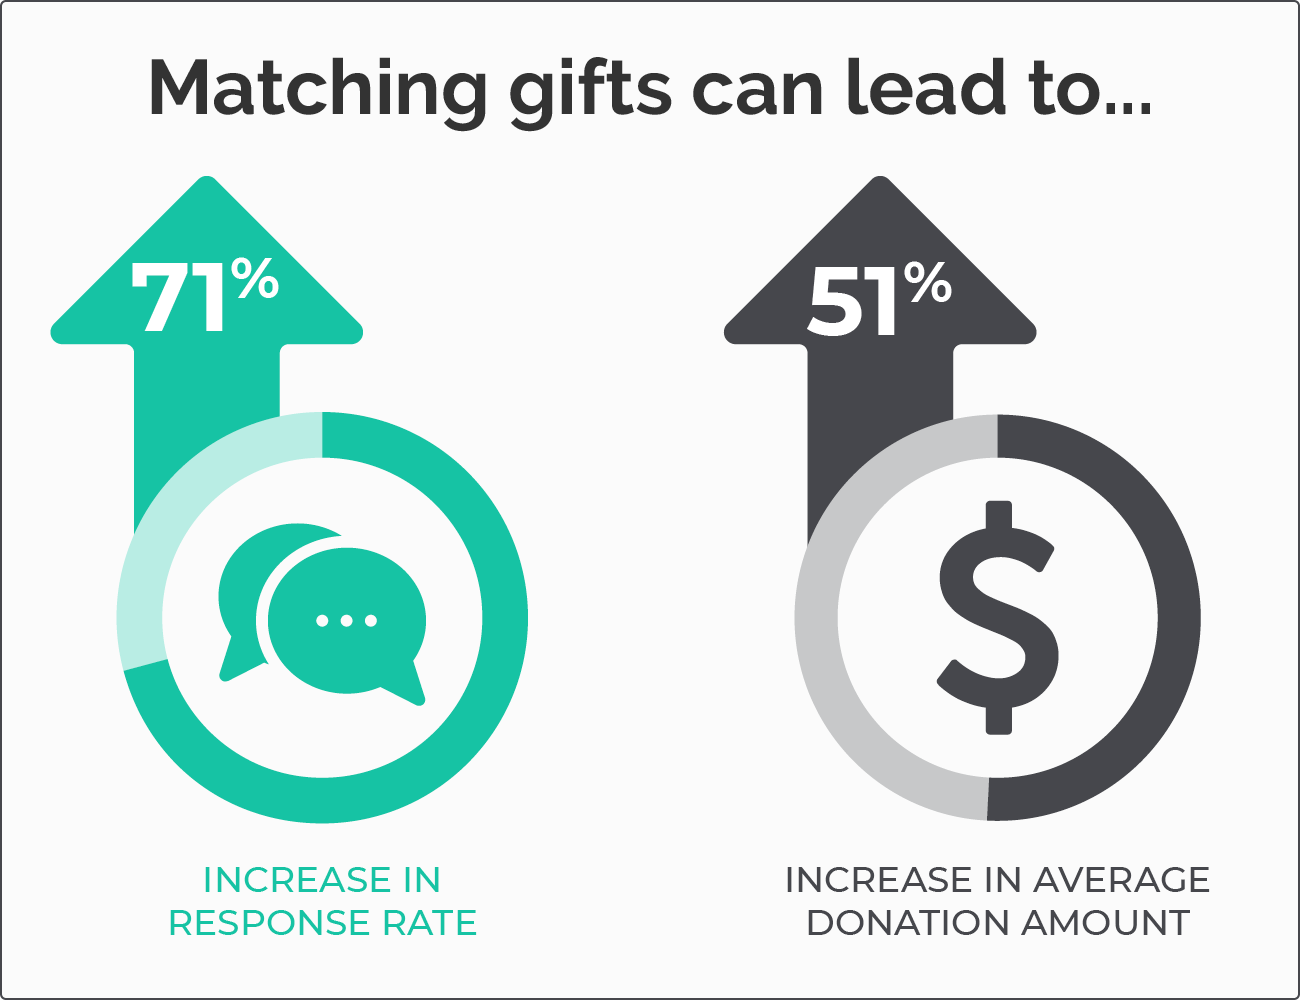 Matching gift stats for food security organizations